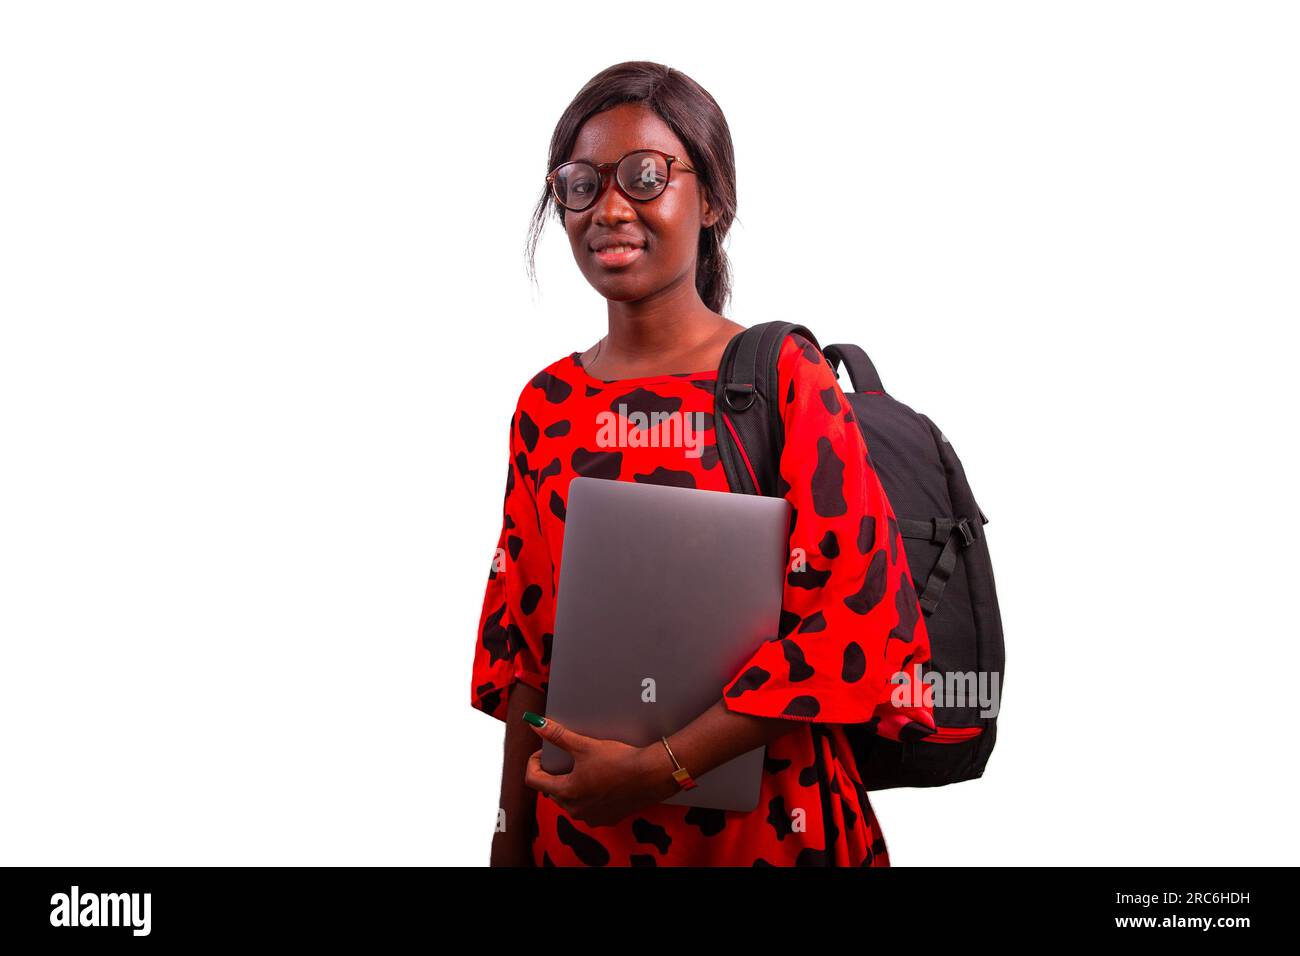 African female student wearing backpack and holding her laptop, photo with white background Stock Photo